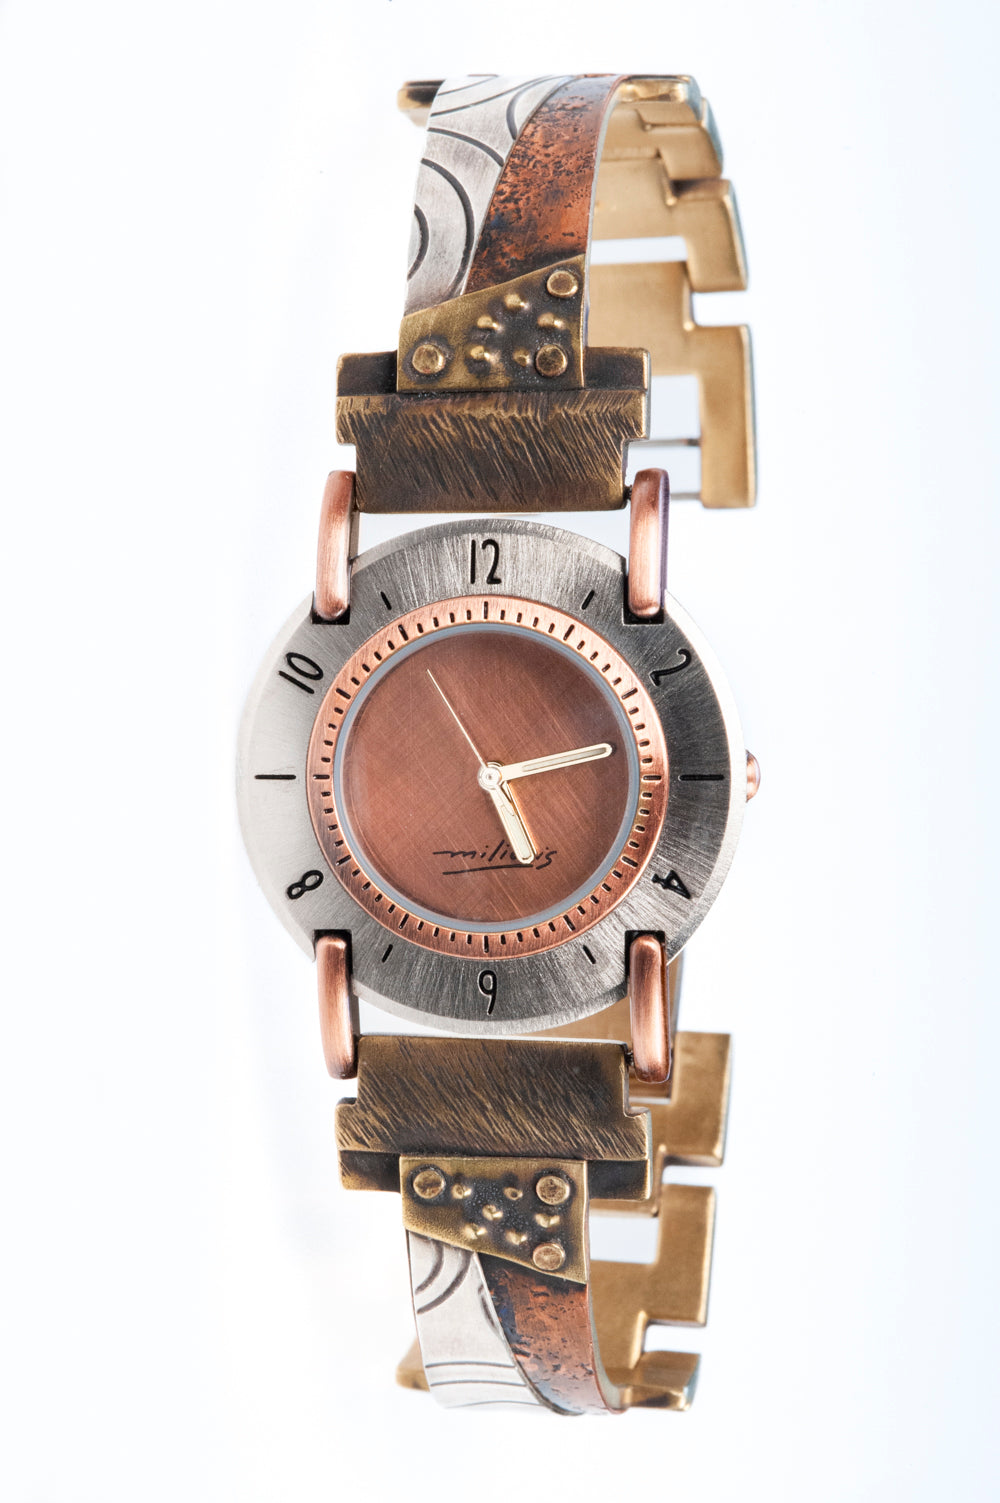 The Europa Tritone with a copper watch dial. Vertical to help you imagine it on your wrist.